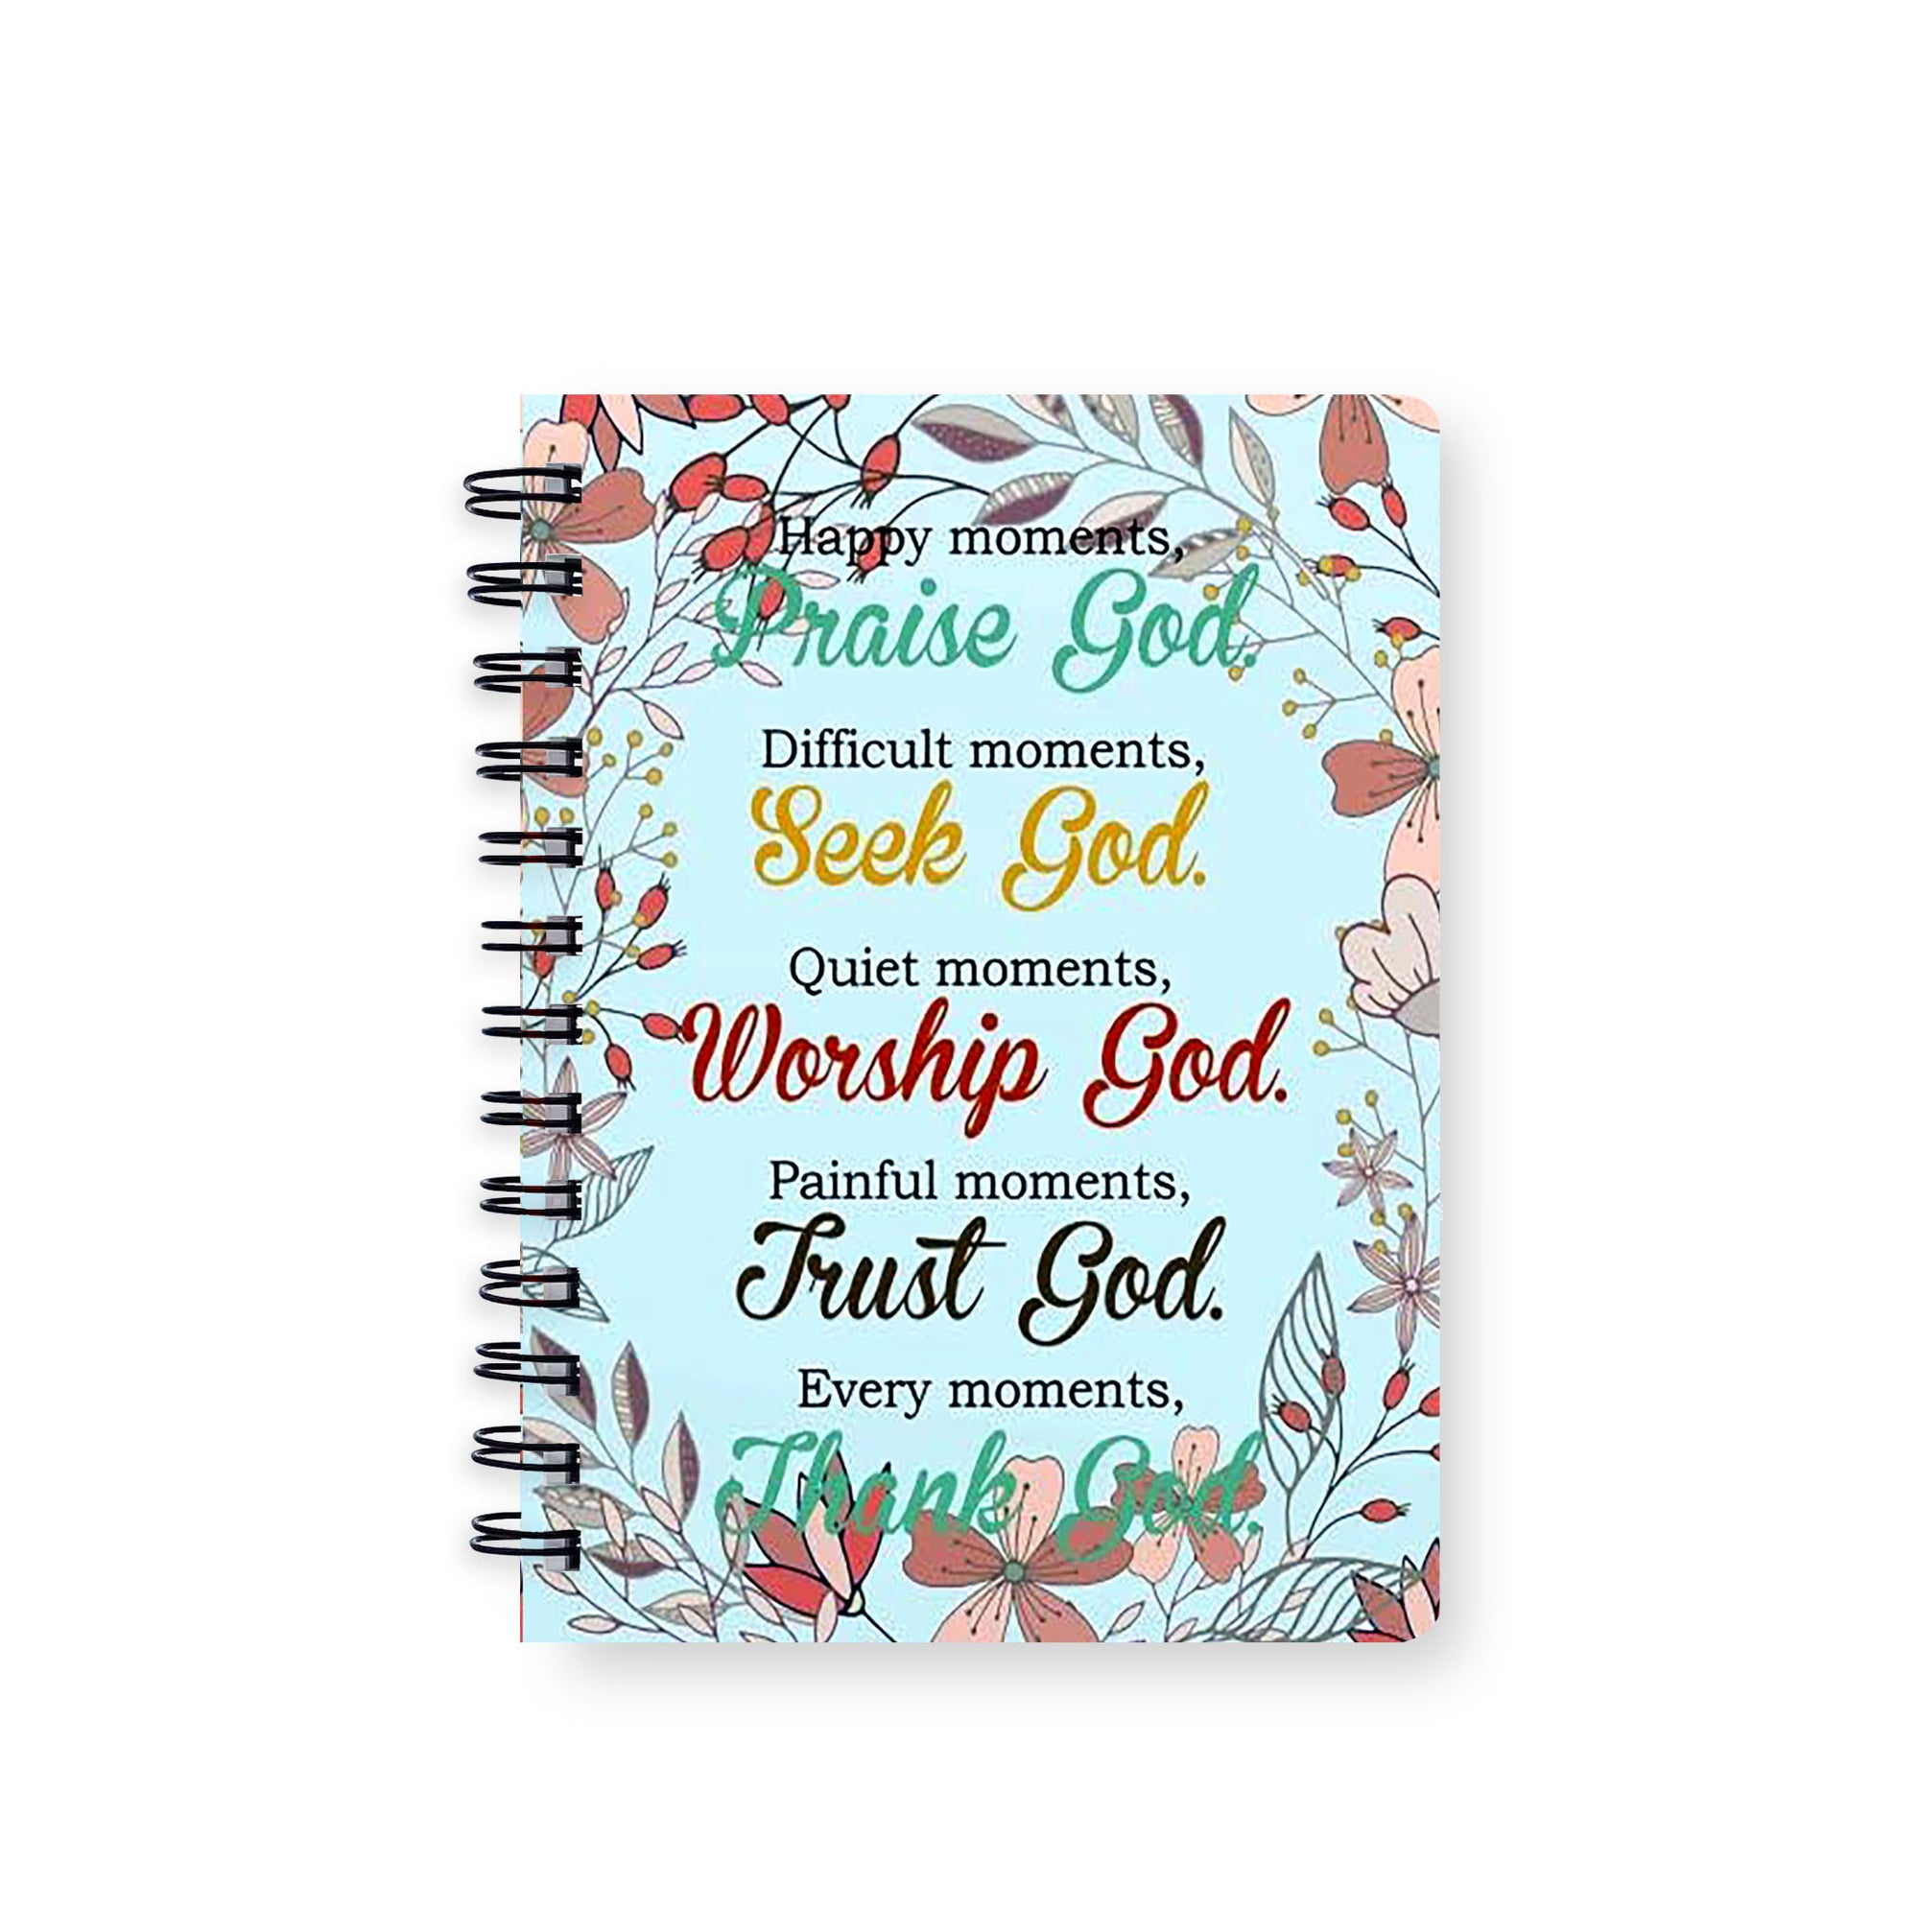 Happy moments, Praise God, Difficult moments, Seek God, Quiet moments, Worship God, Painful moments, Trust God. Every moments, Thank Go Spiral Journal